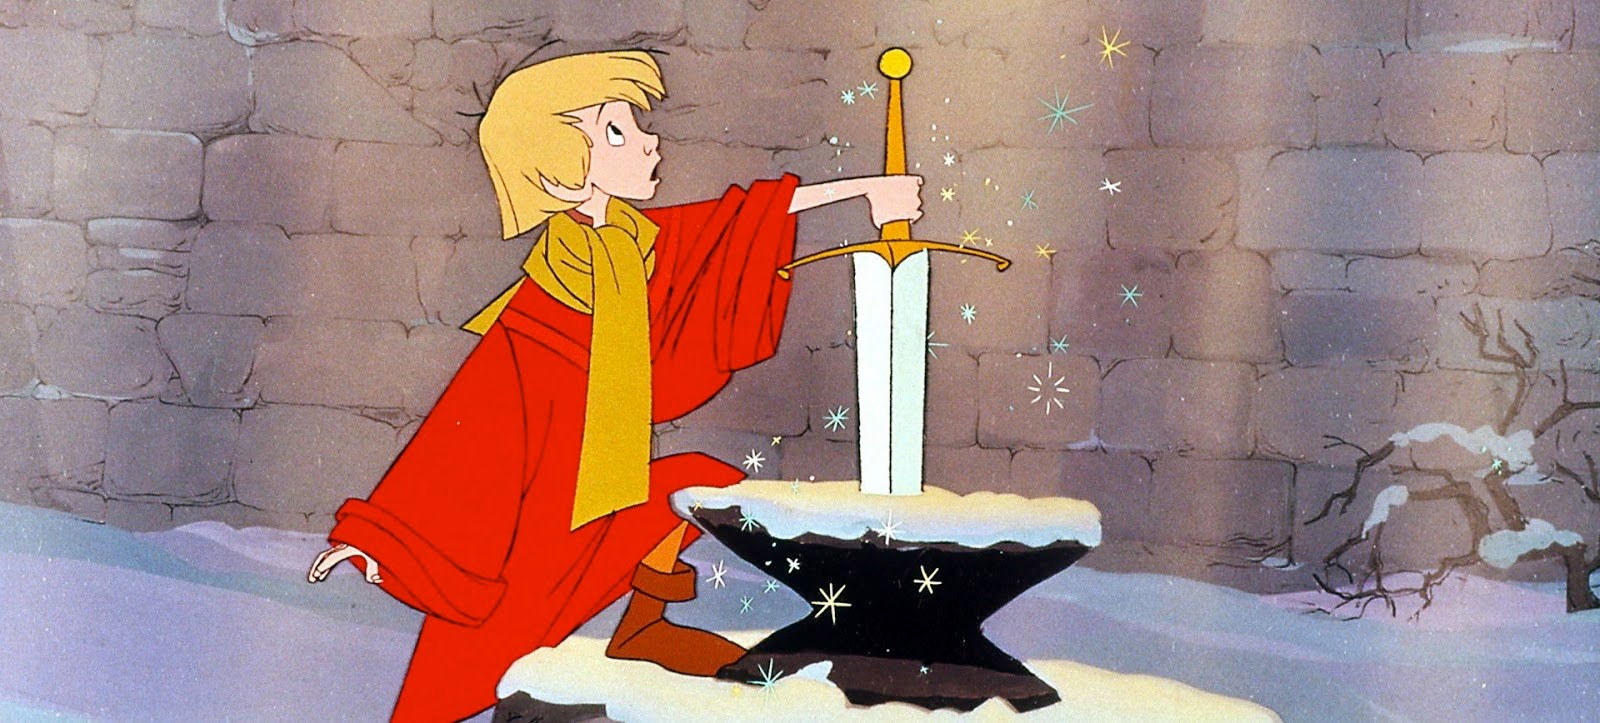 disney-developing-live-action-sword-in-the-stone-remake